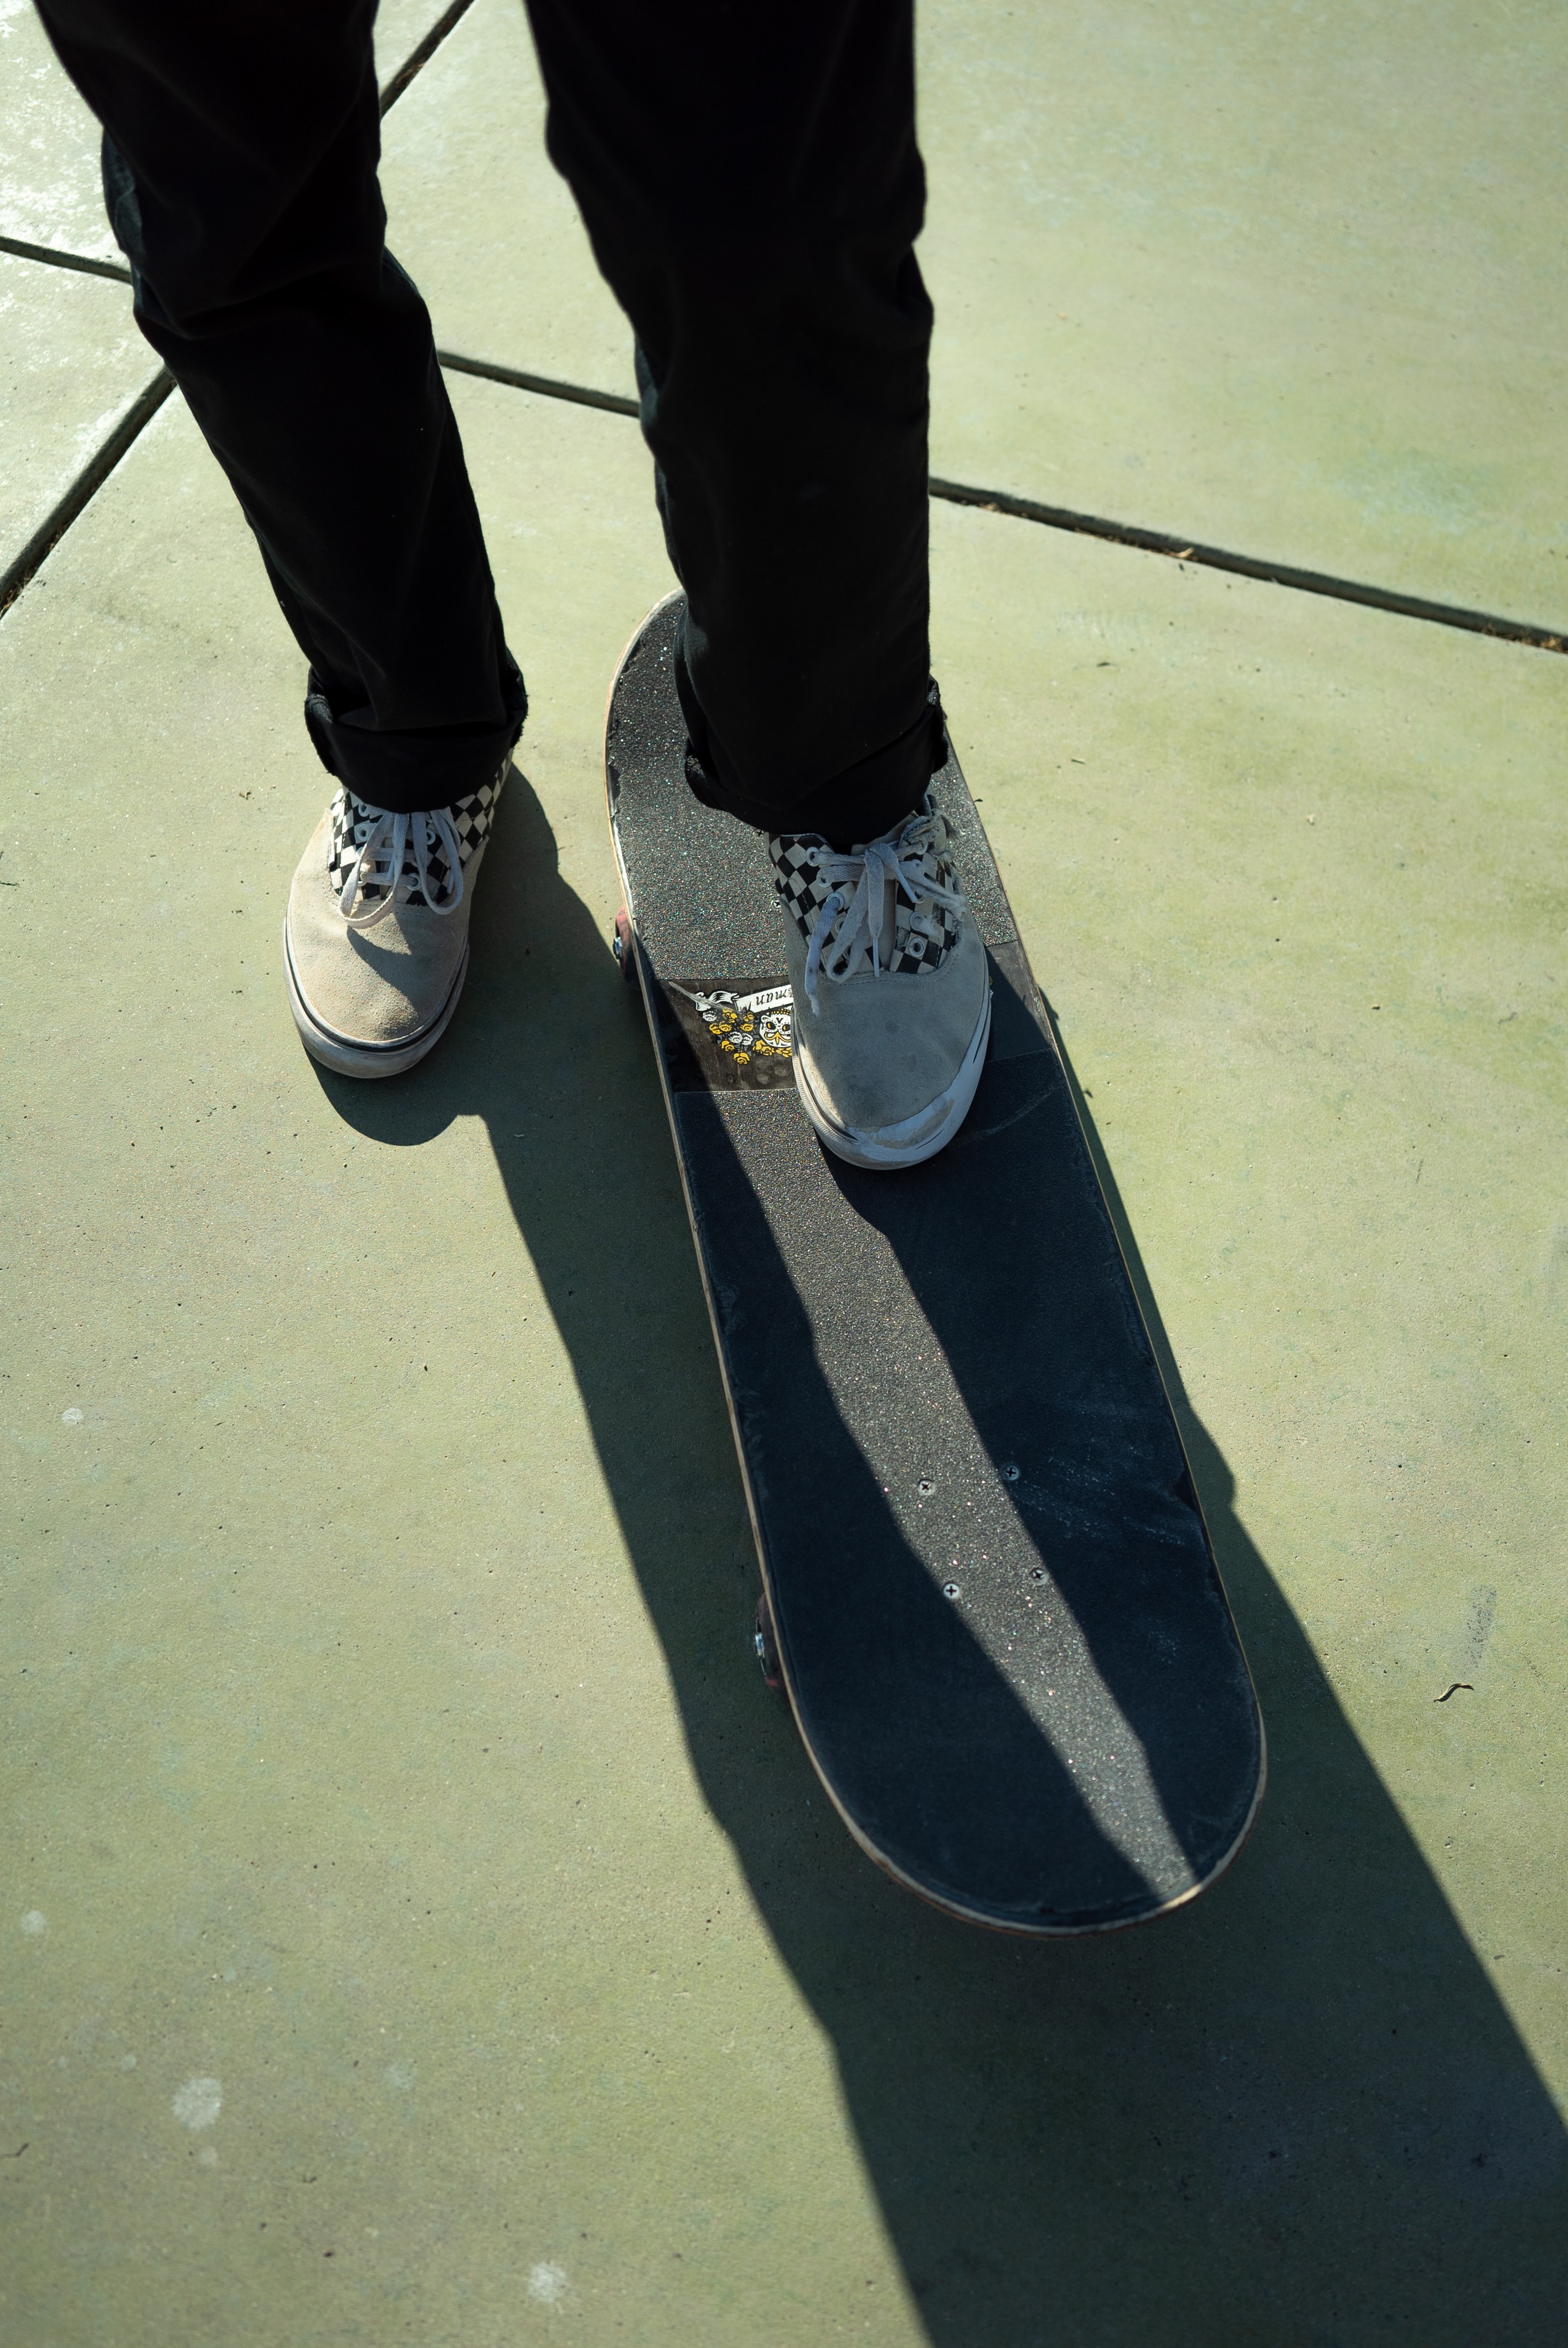 skate, miscellanea, miscellaneous, legs, sneakers, style, shoes, trousers